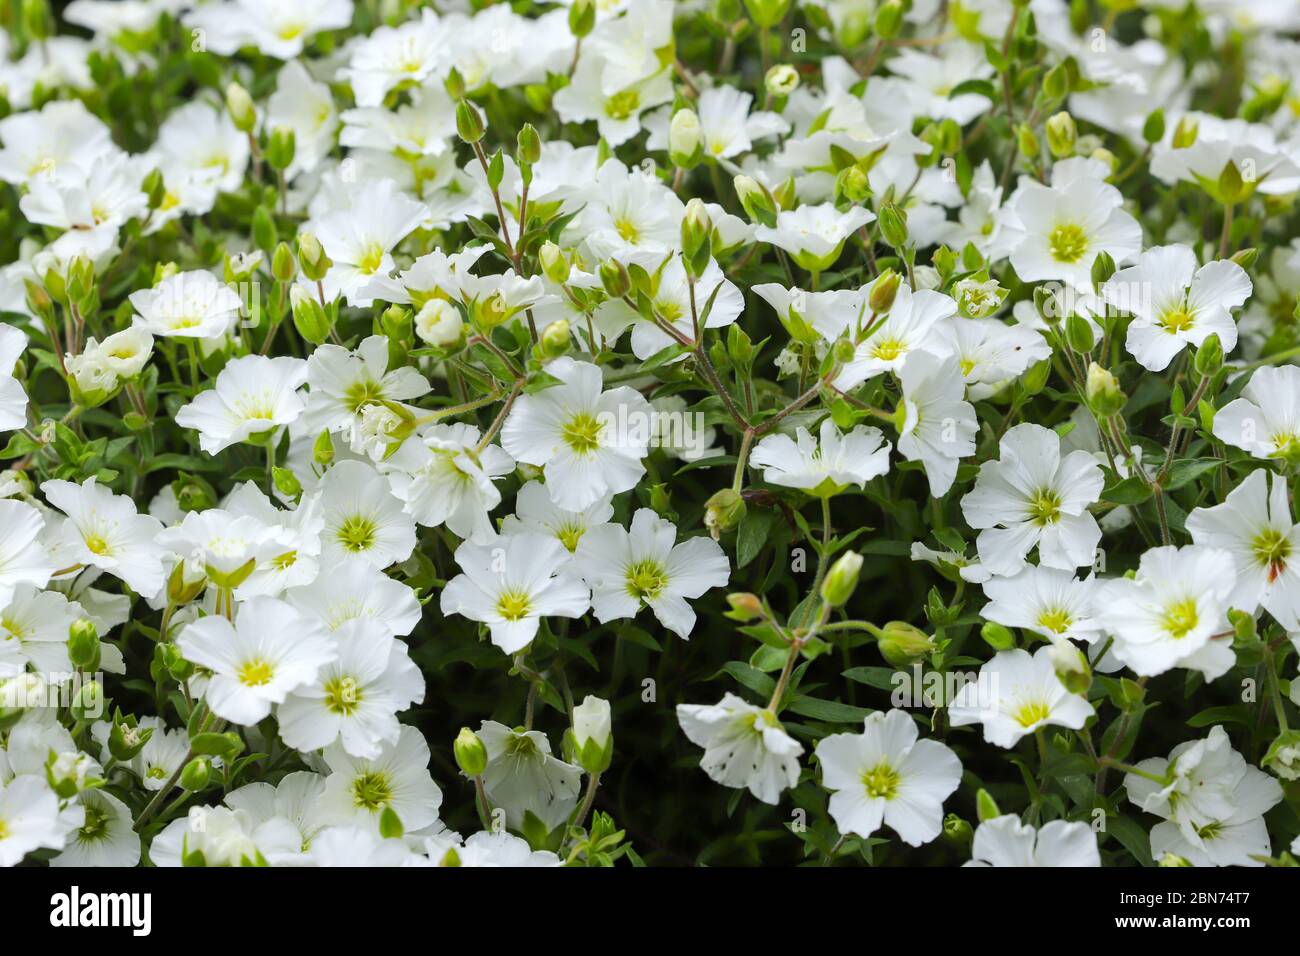 Mass Of Small White Flowers High Resolution Stock Photography And Images Alamy